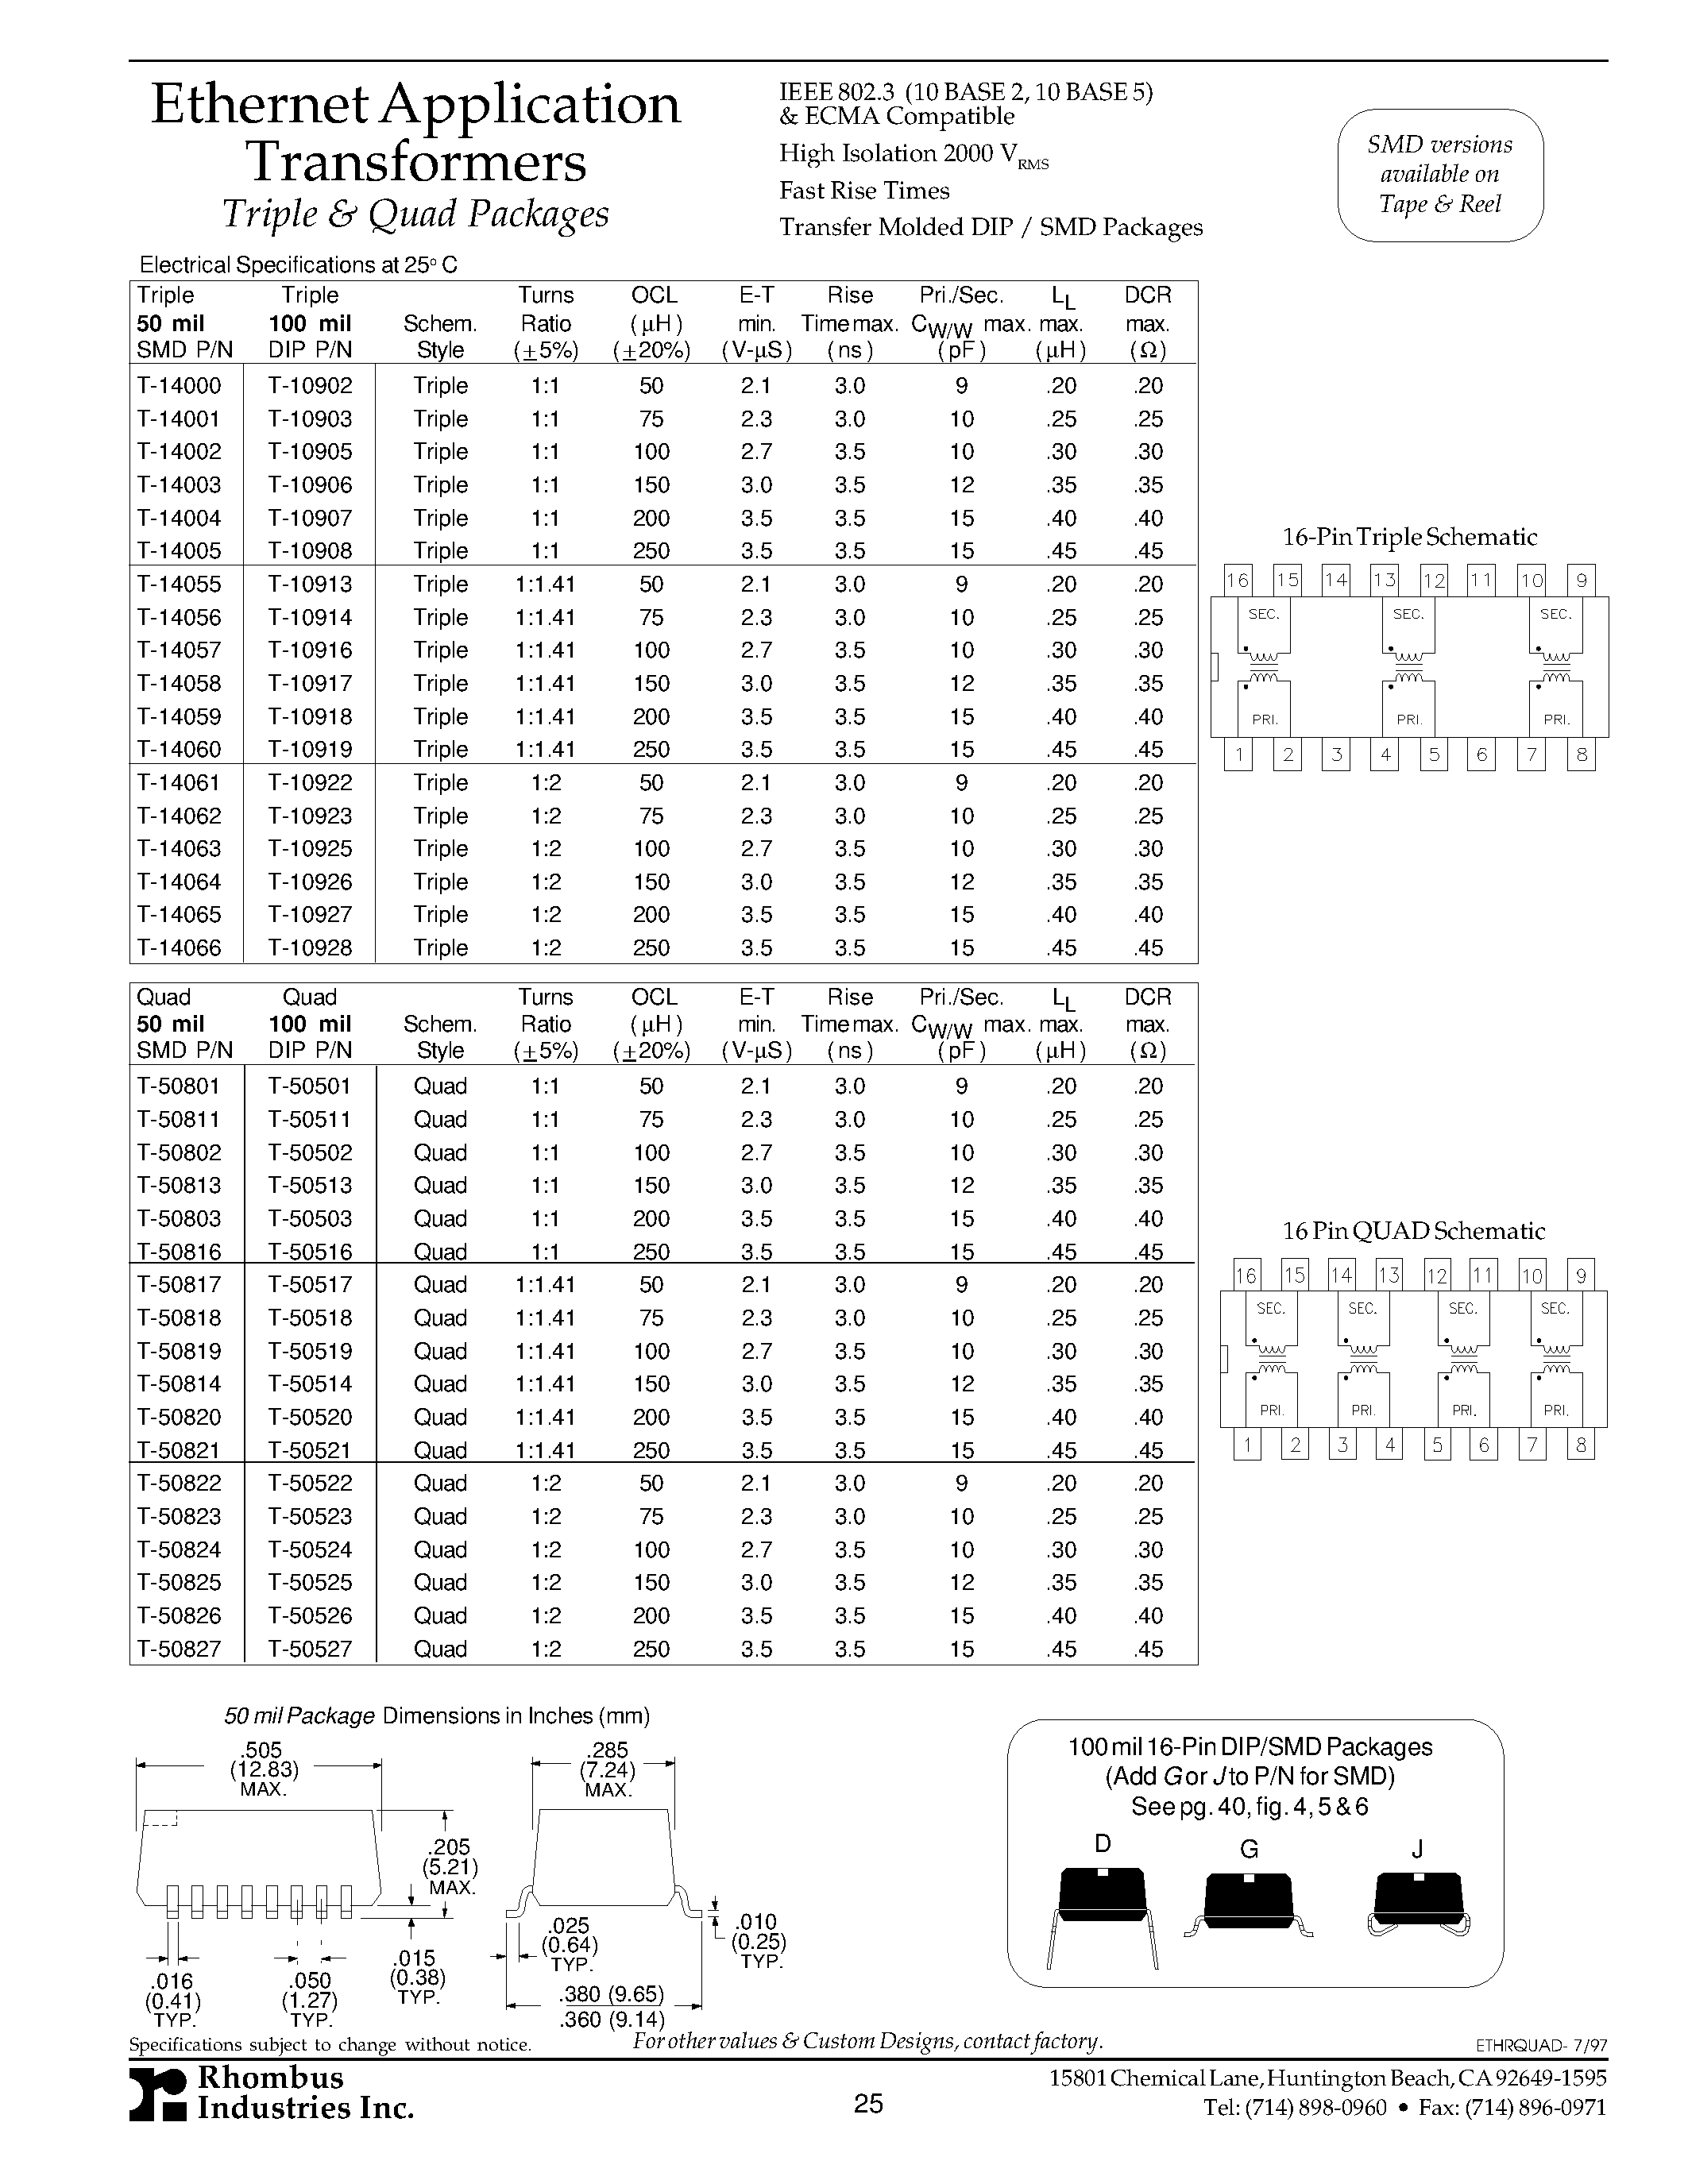 Datasheet T-1400x - Ethernet Application Transformers page 1